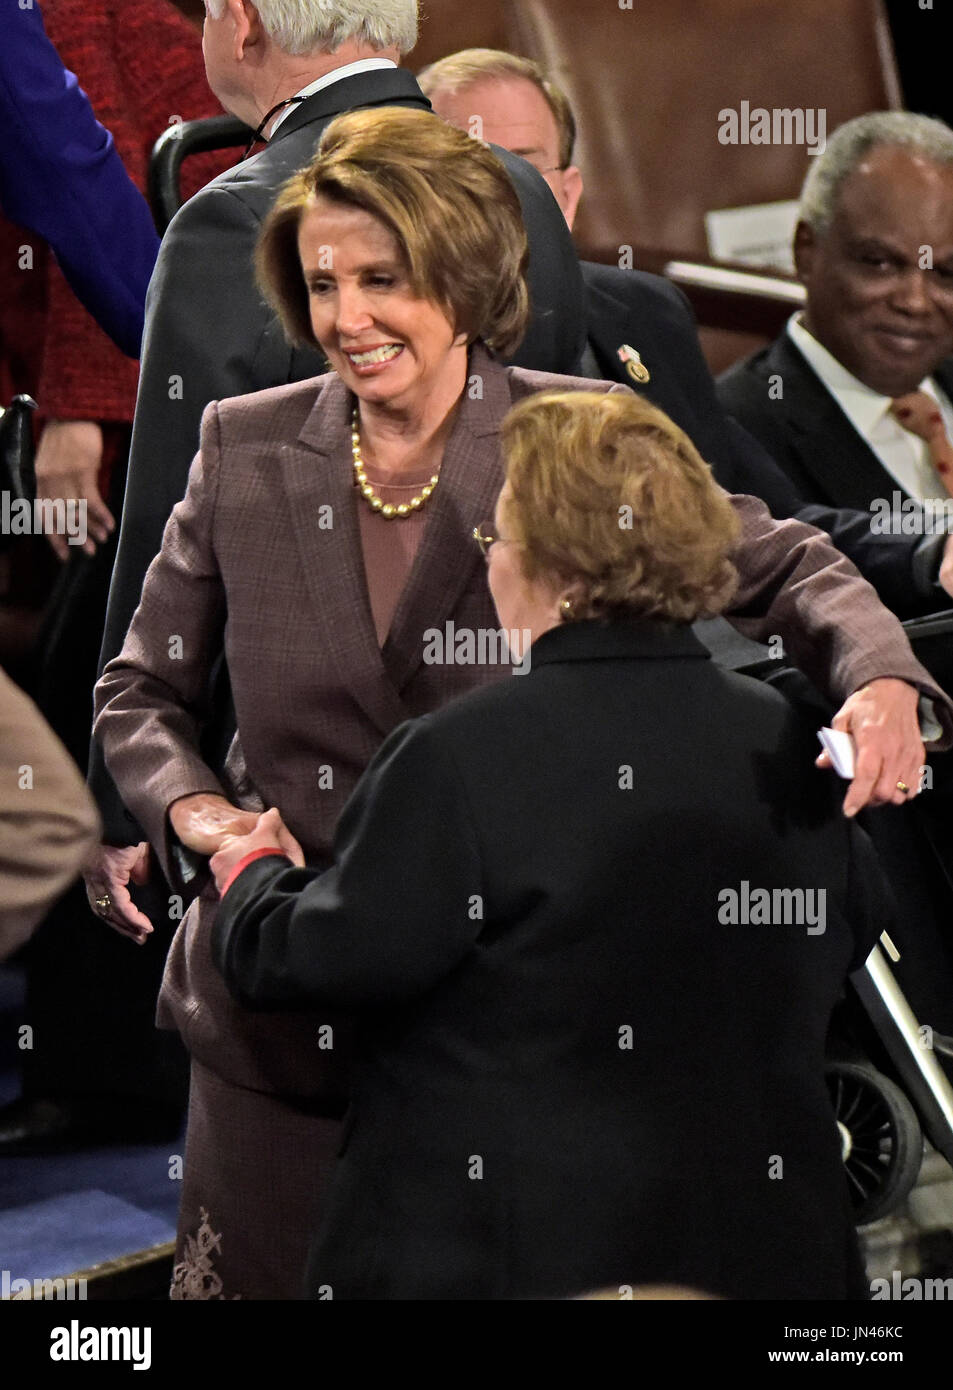 United States House Minority Leader Nancy Pelosi (Democrat of California) embraces retiring U.S. Senator Barbara Mikulski (Democrat of Maryland) prior to Prime Minister Benjamin Netanyahu of Israel delivering an address to a joint session of the United States Congress in the U.S. Capitol in Washington, D.C. on Tuesday, March 3, 2015. Credit: Ron Sachs / CNP (RESTRICTION: NO New York or New Jersey Newspapers or newspapers within a 75 mile radius of New York City) Stock Photo